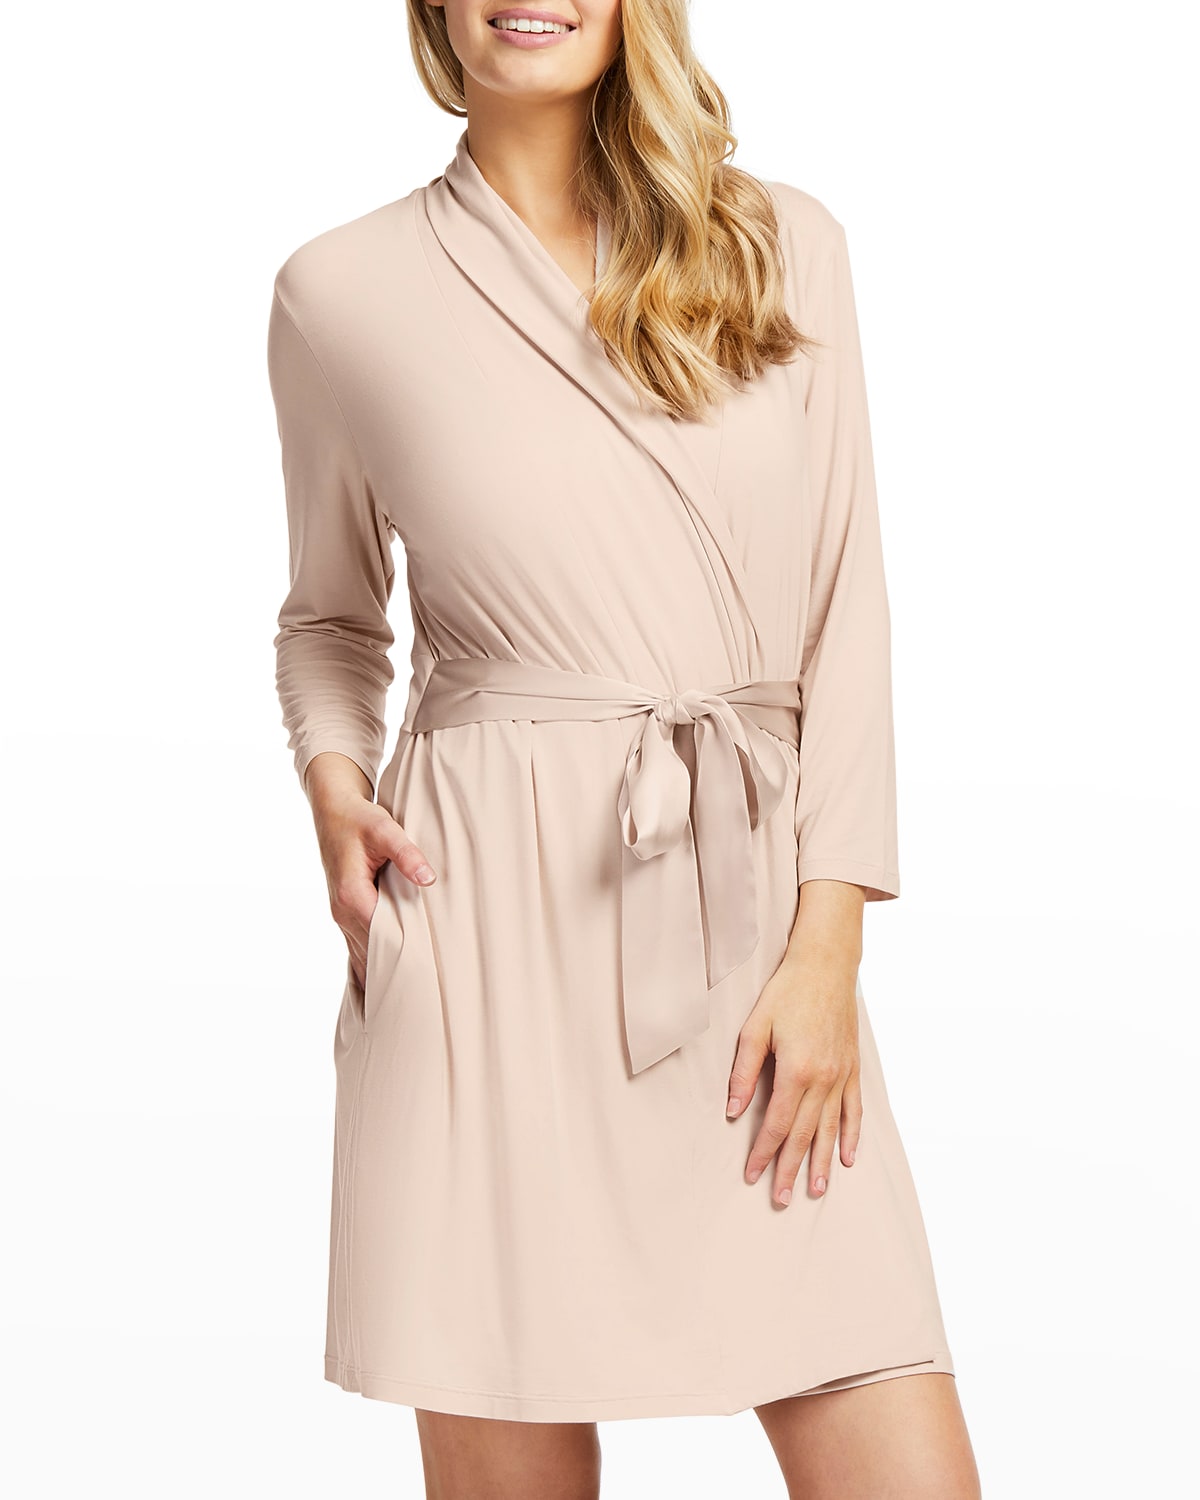 Fleur't Iconic Robe In Champagne